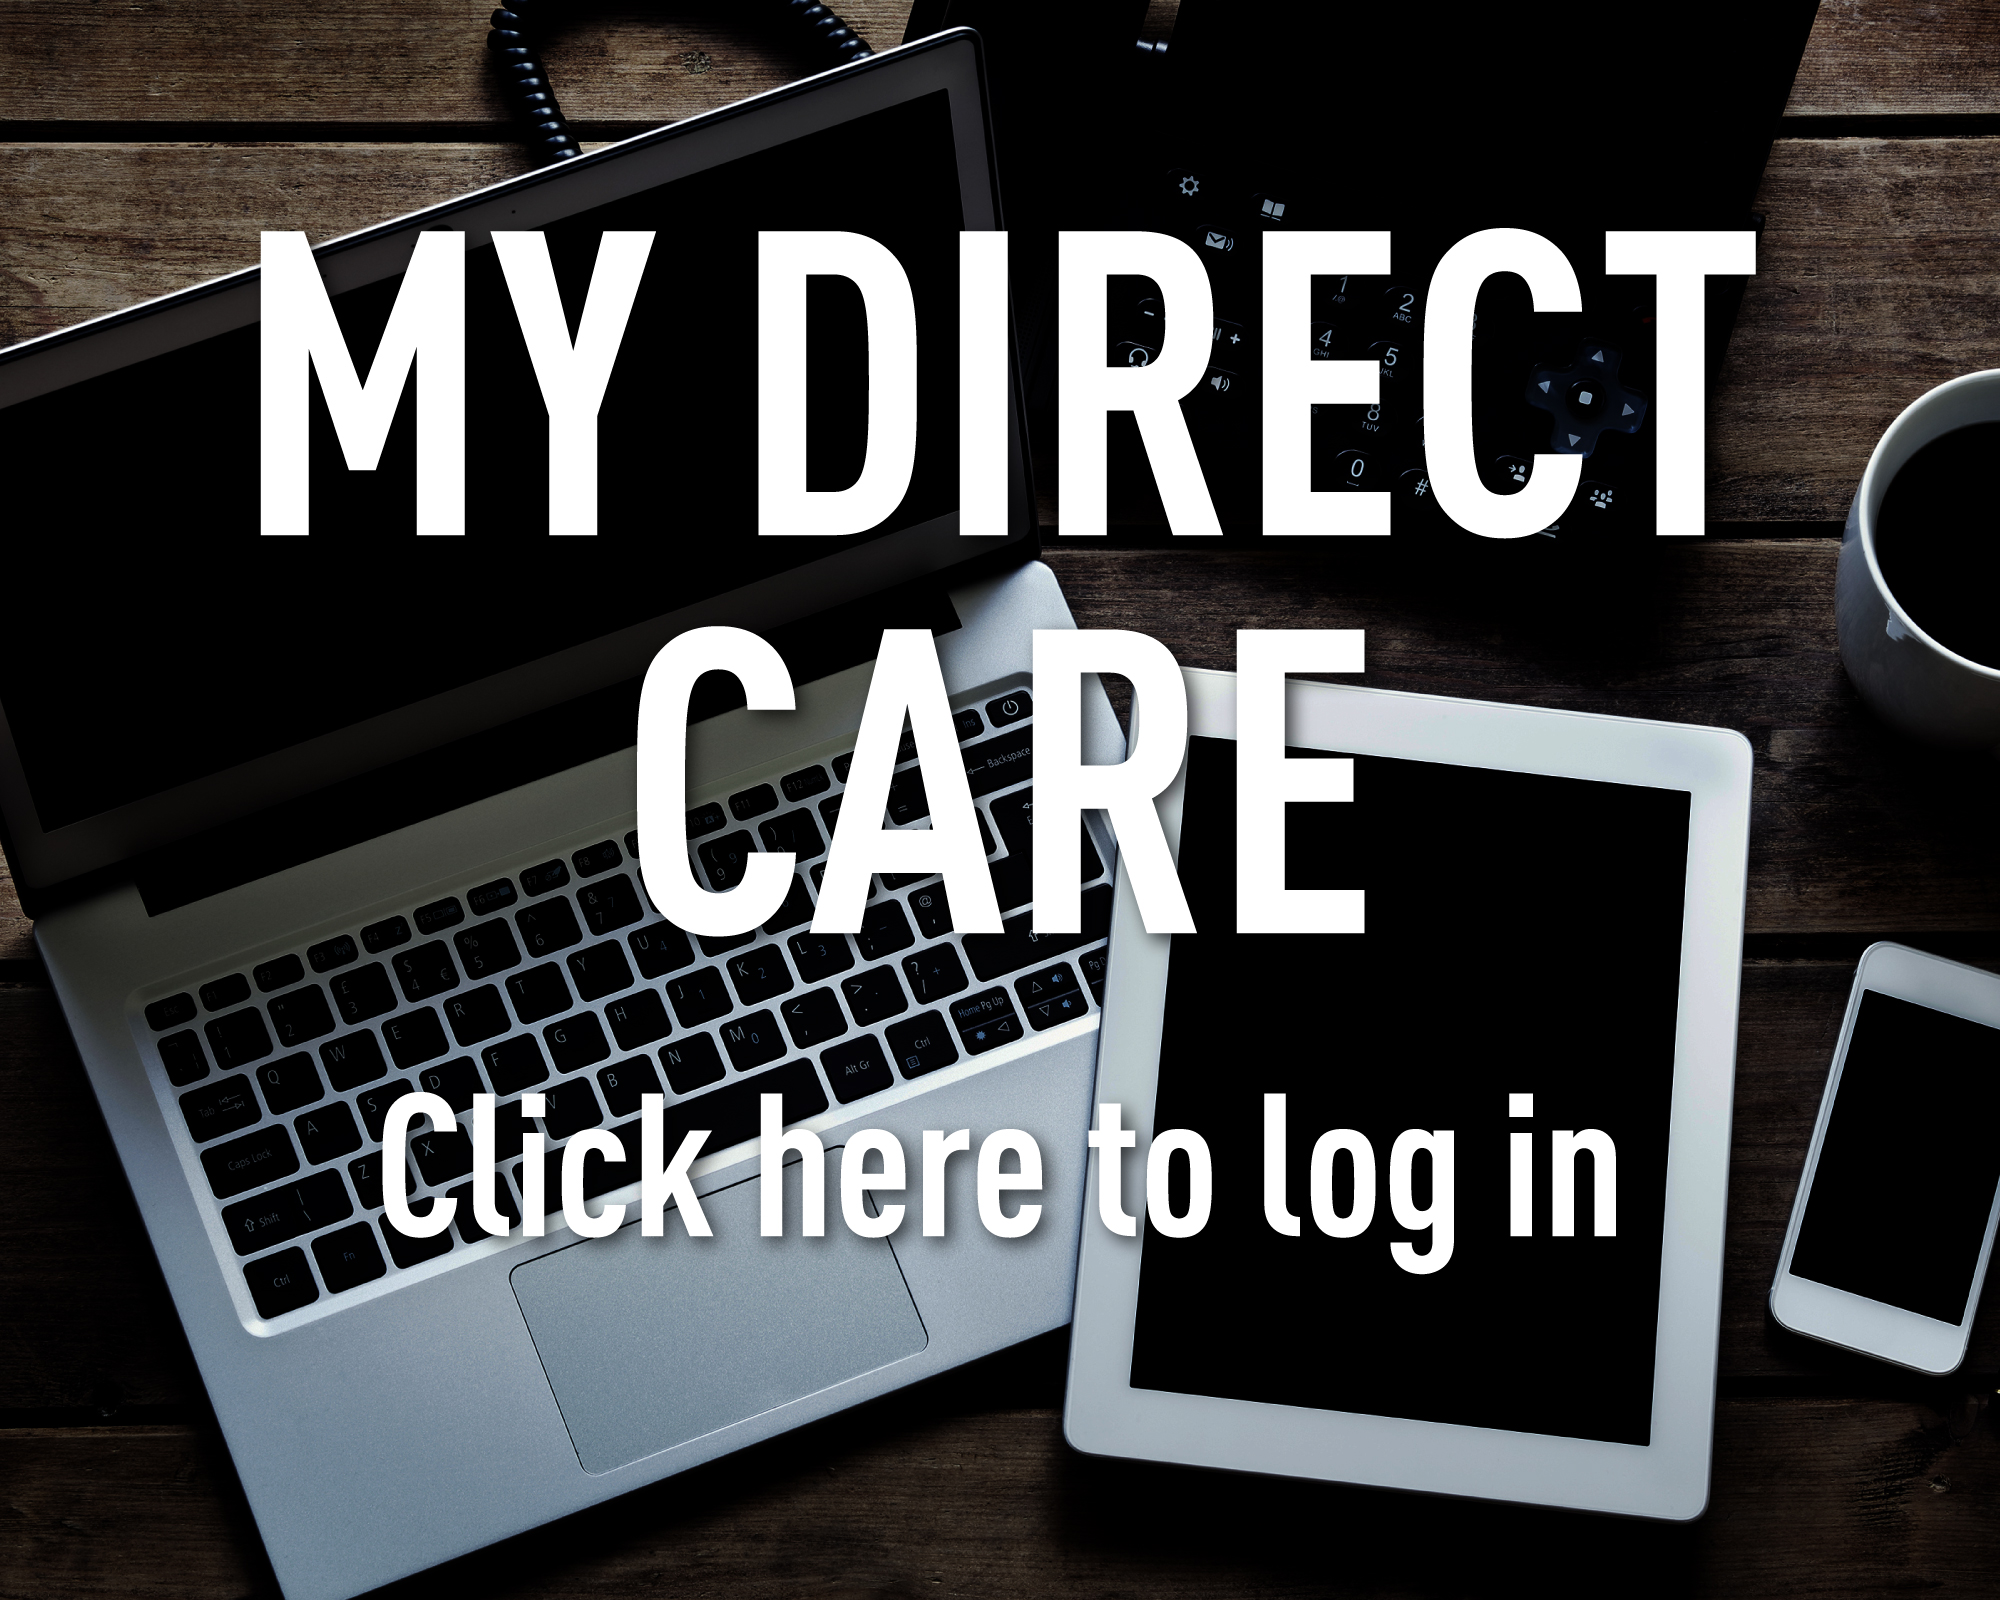 My Direct Care. Click here to log in.